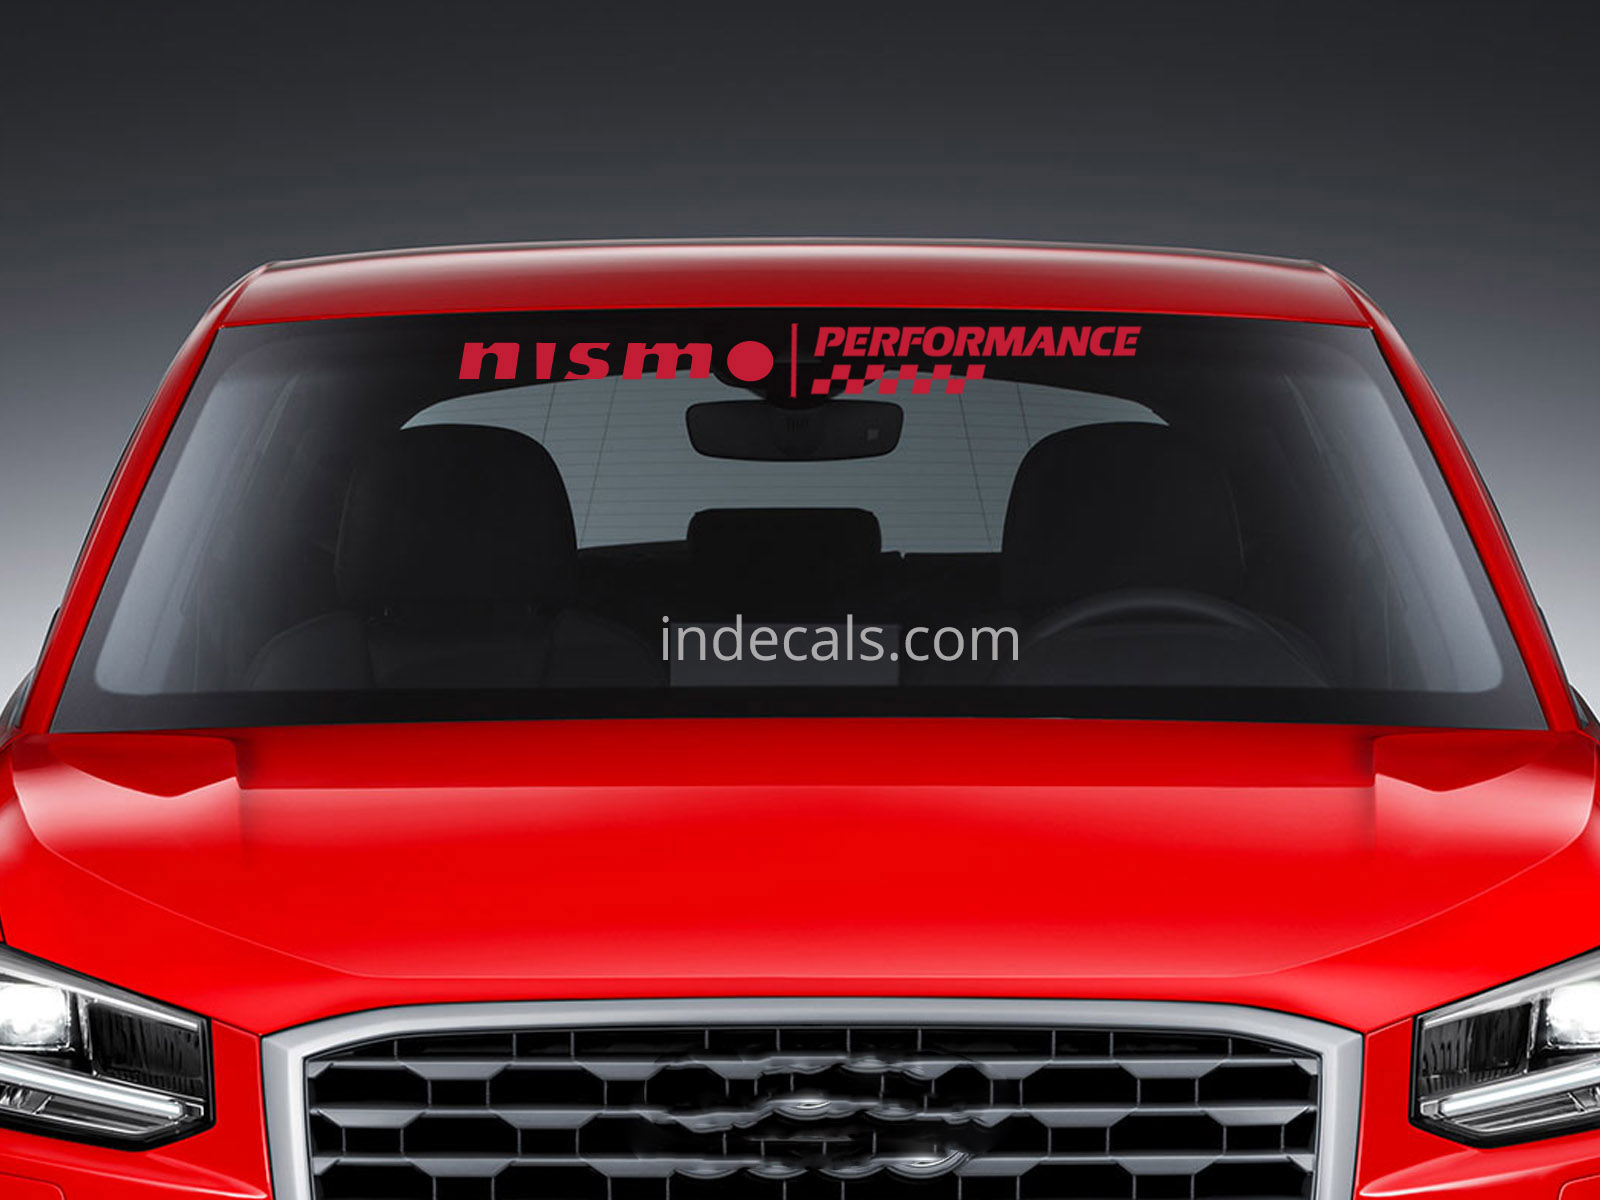 1 x Nismo Performance Sticker for Windshield or Back Window - Red